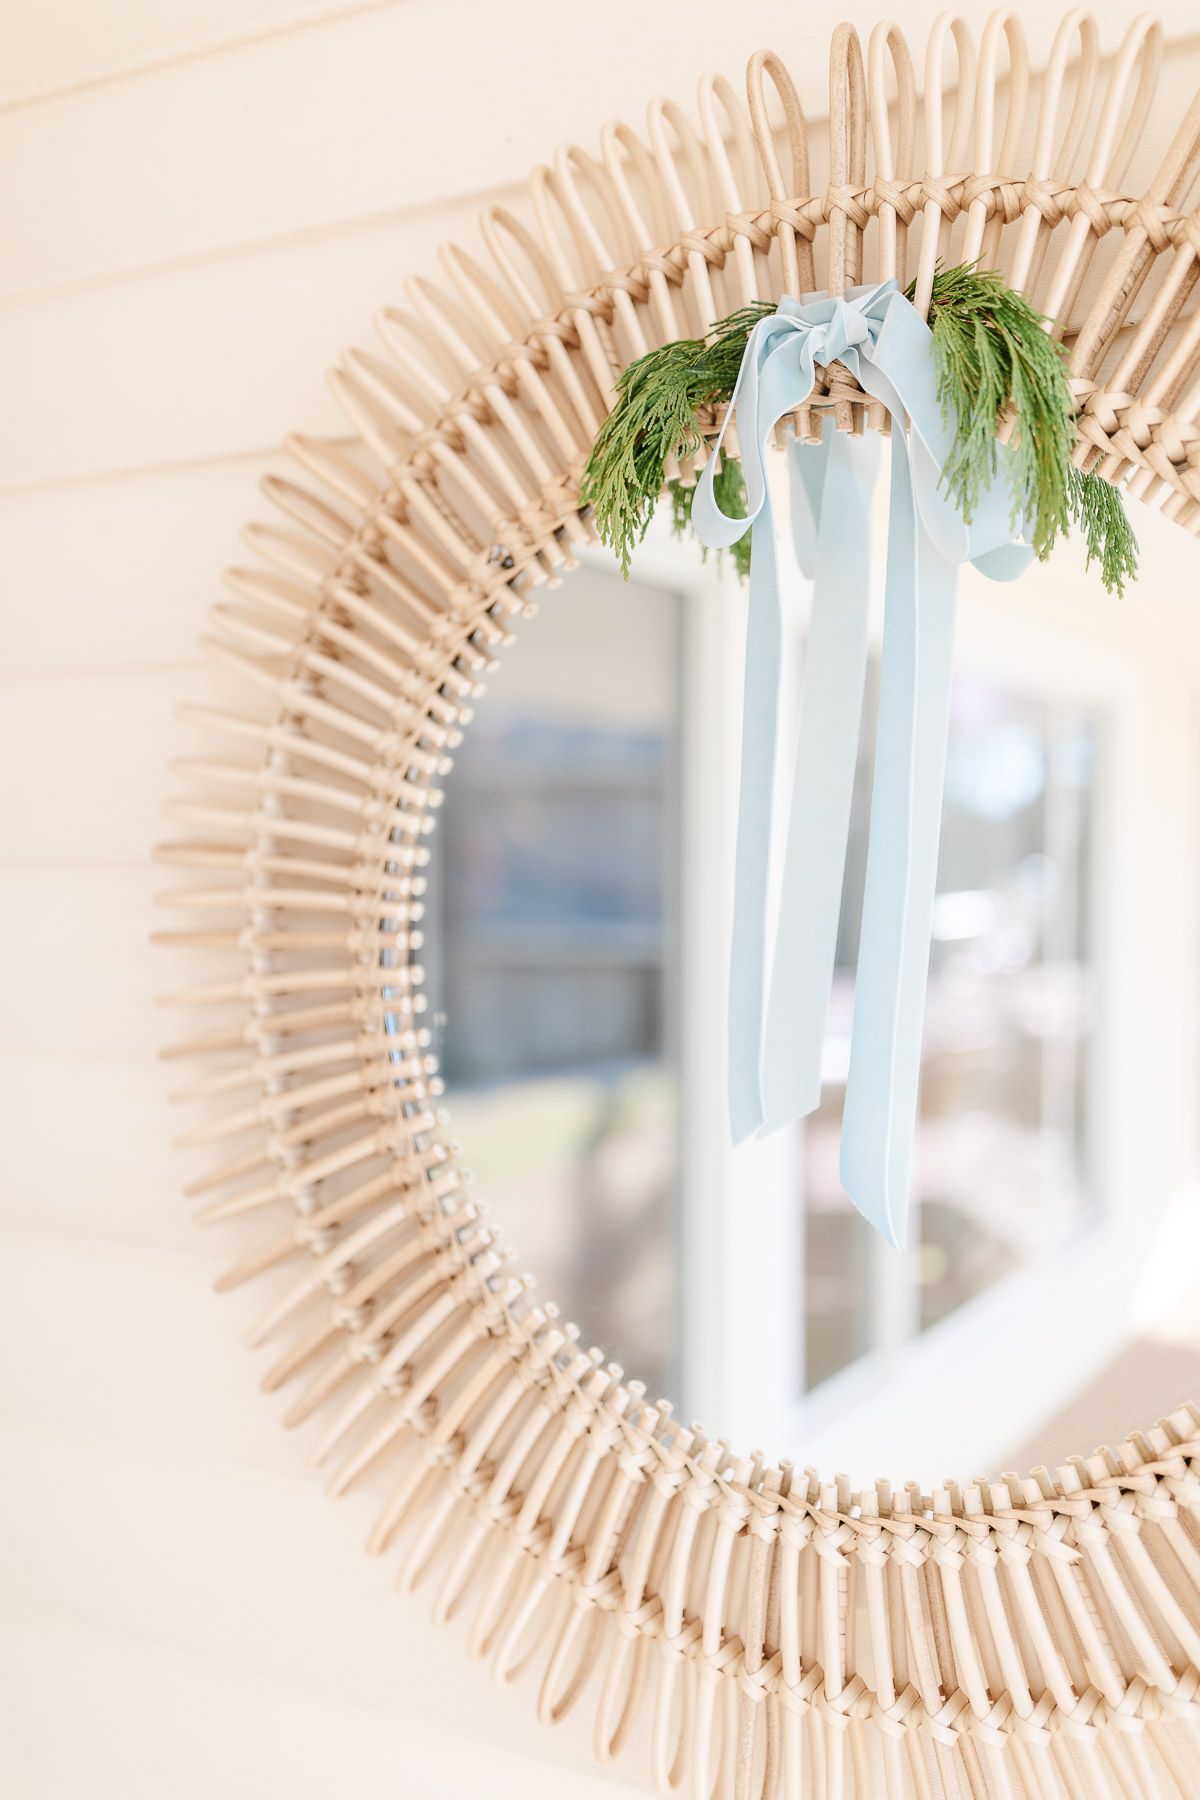 A round rattan mirror with a blue ribbon and greenery tied on